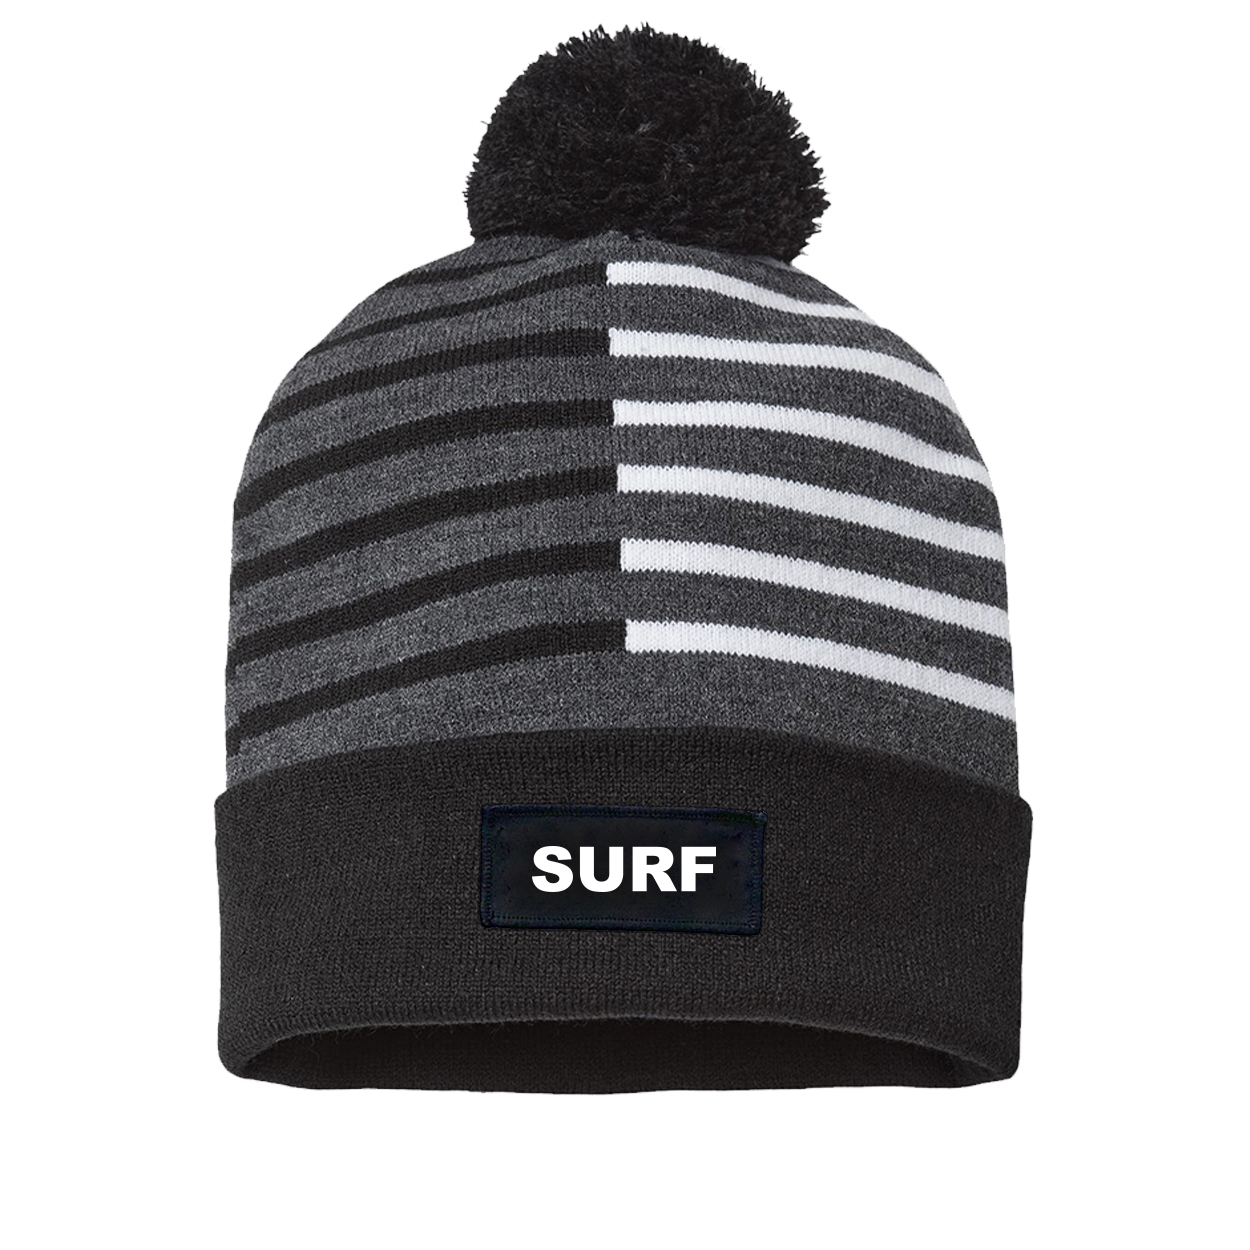 Surf Brand Logo Night Out Woven Patch Roll Up Pom Knit Beanie Half Color Black/White